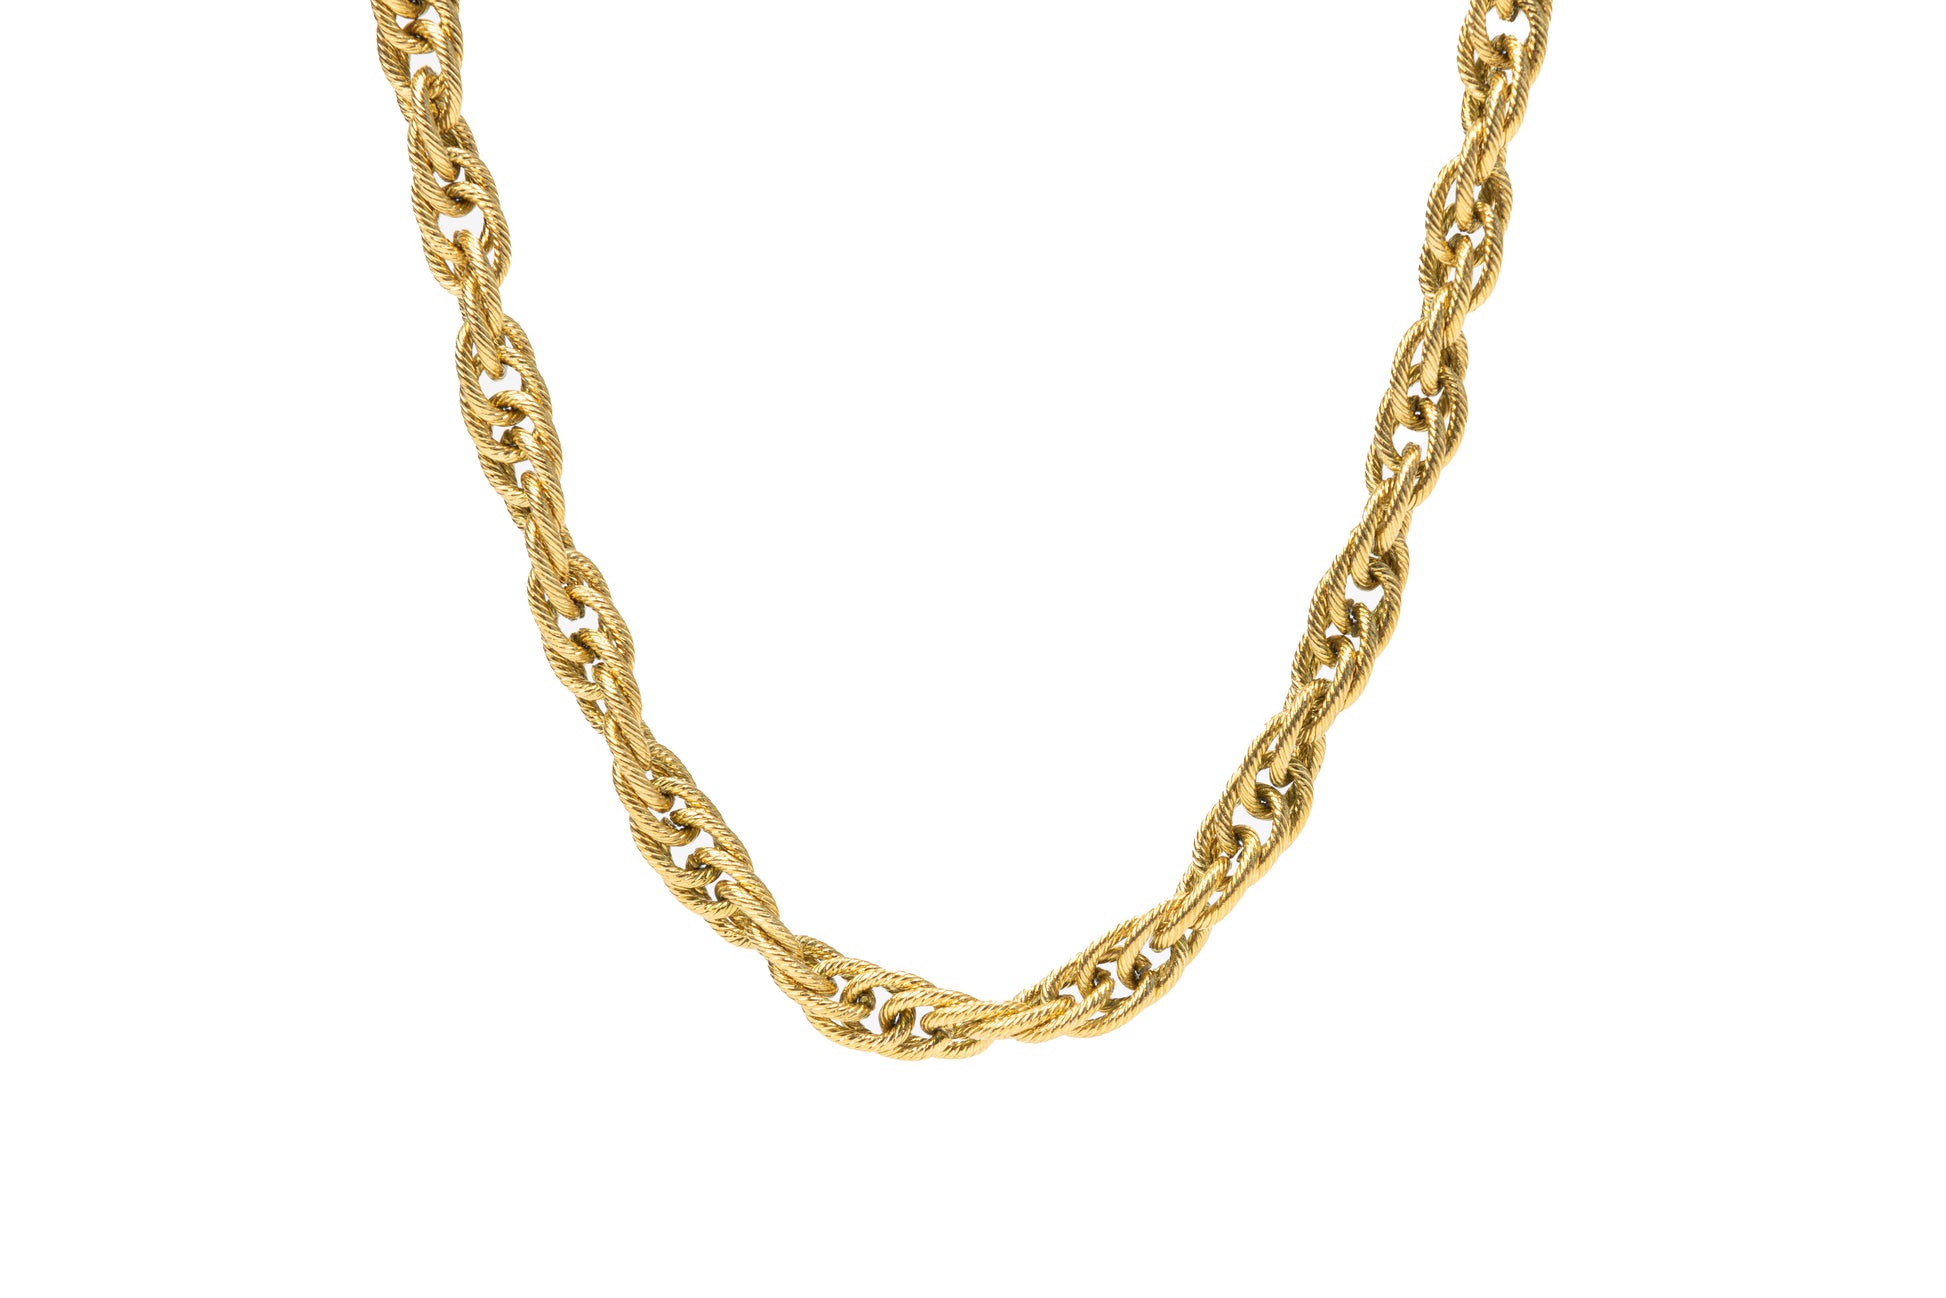 Planderful Golden Twisted Chain Necklace - Golden Necklace for Women